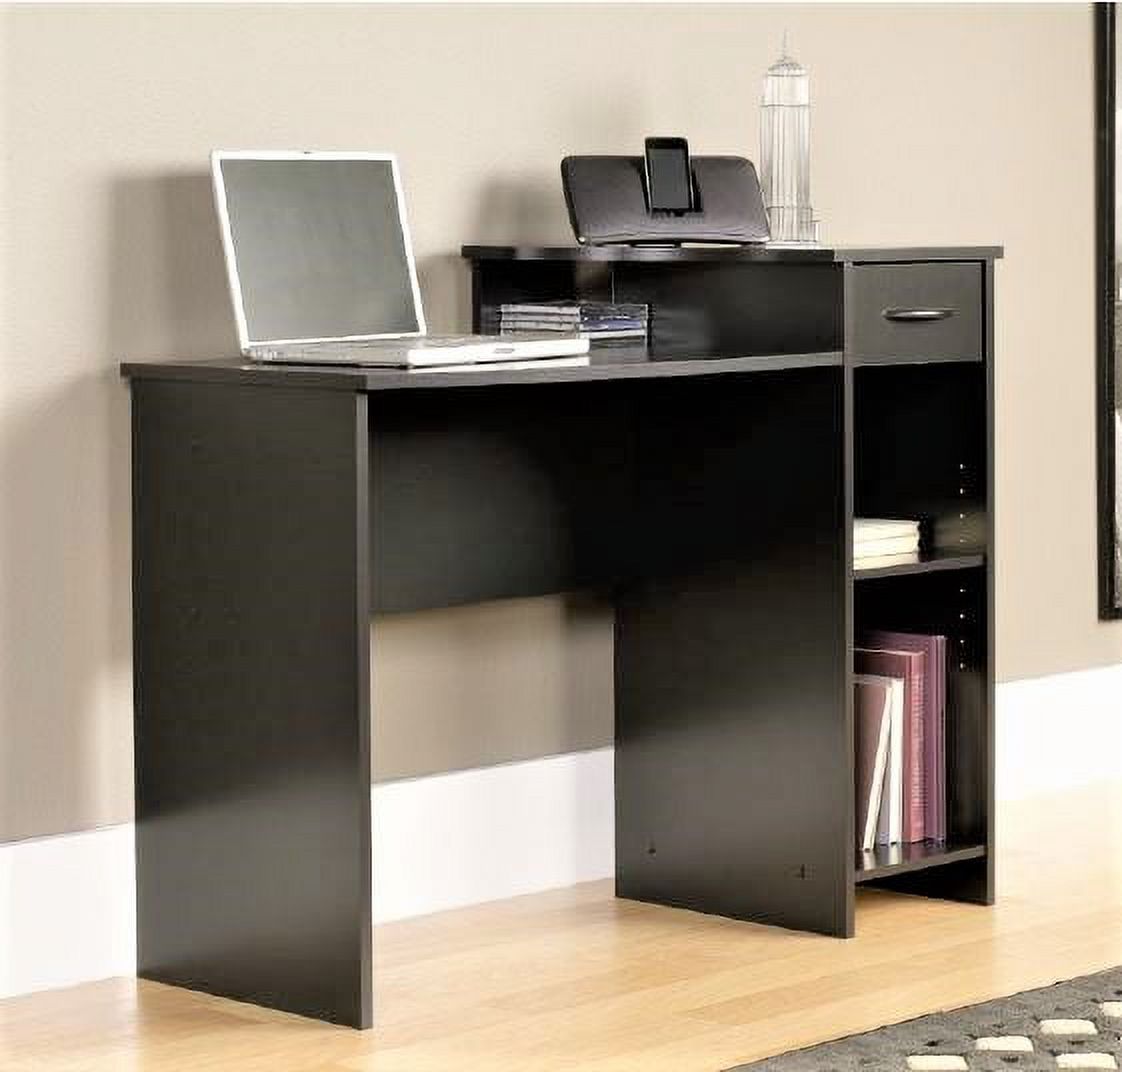 Mainstays Student Desk with Easy-glide Drawer, Blackwood Finish - image 1 of 6